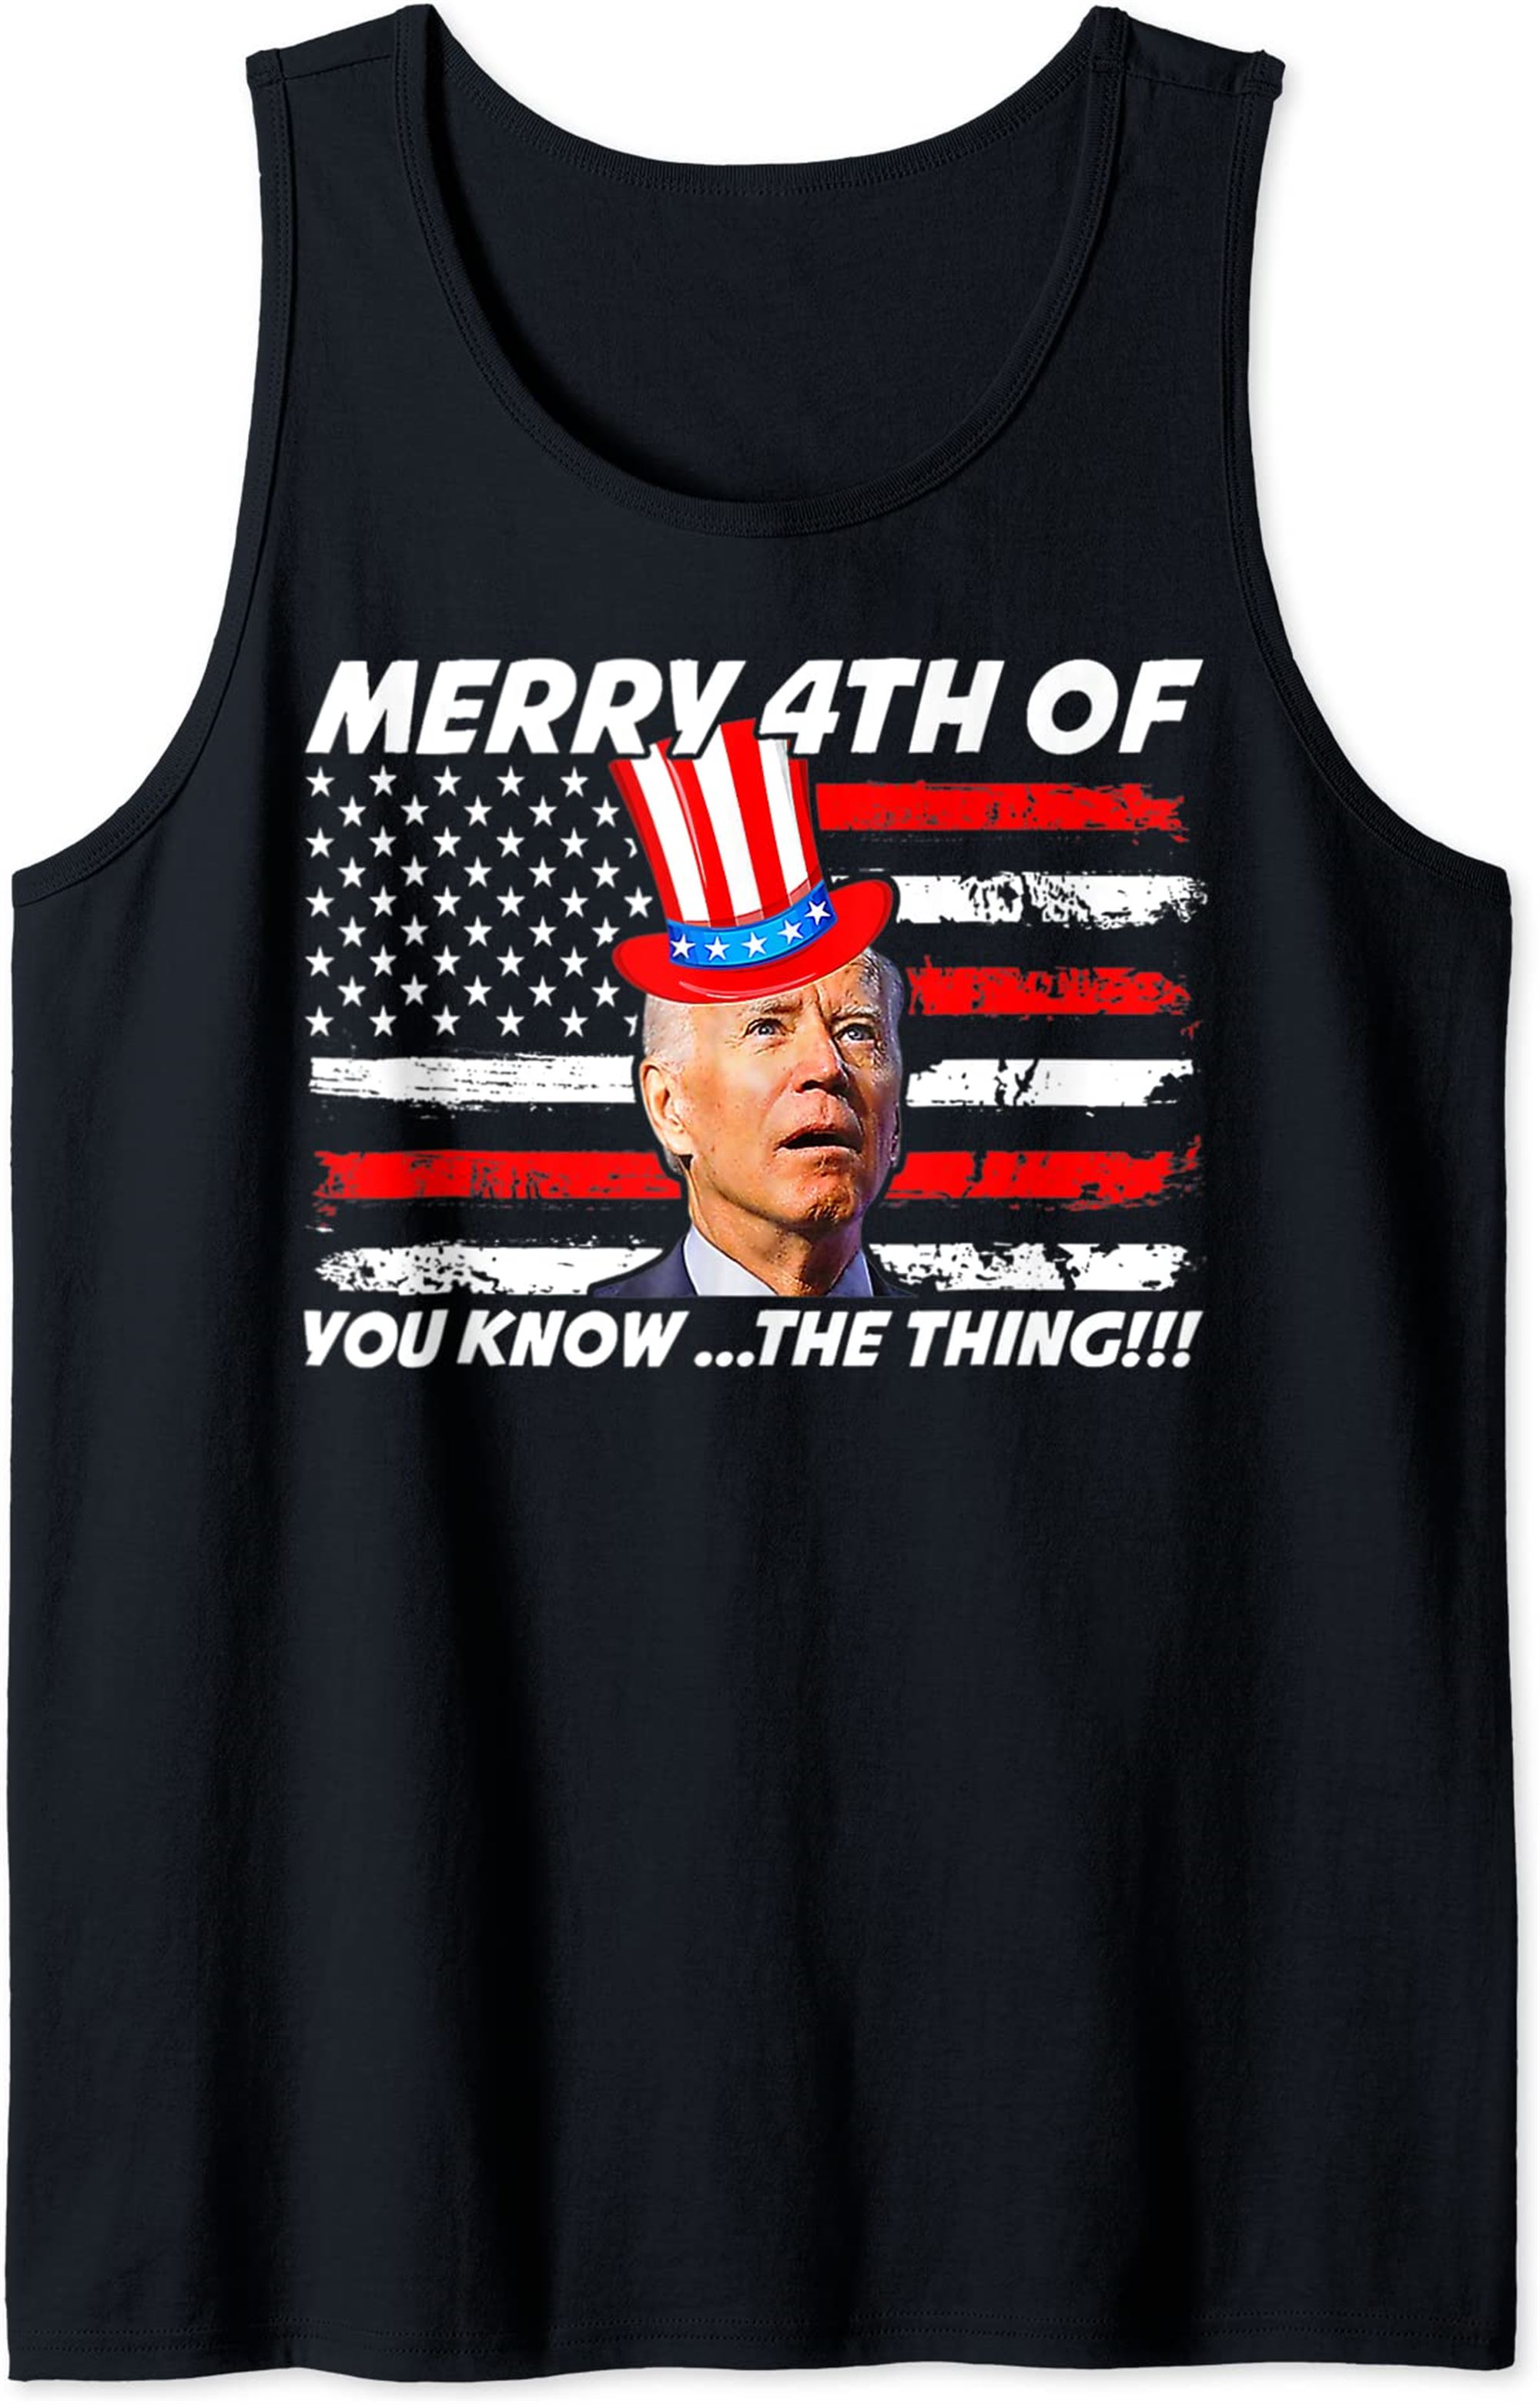 Funny Joe Biden Dazed Merry 4th Of You Know The Thing Tank Top Plus Size Up To 5xl